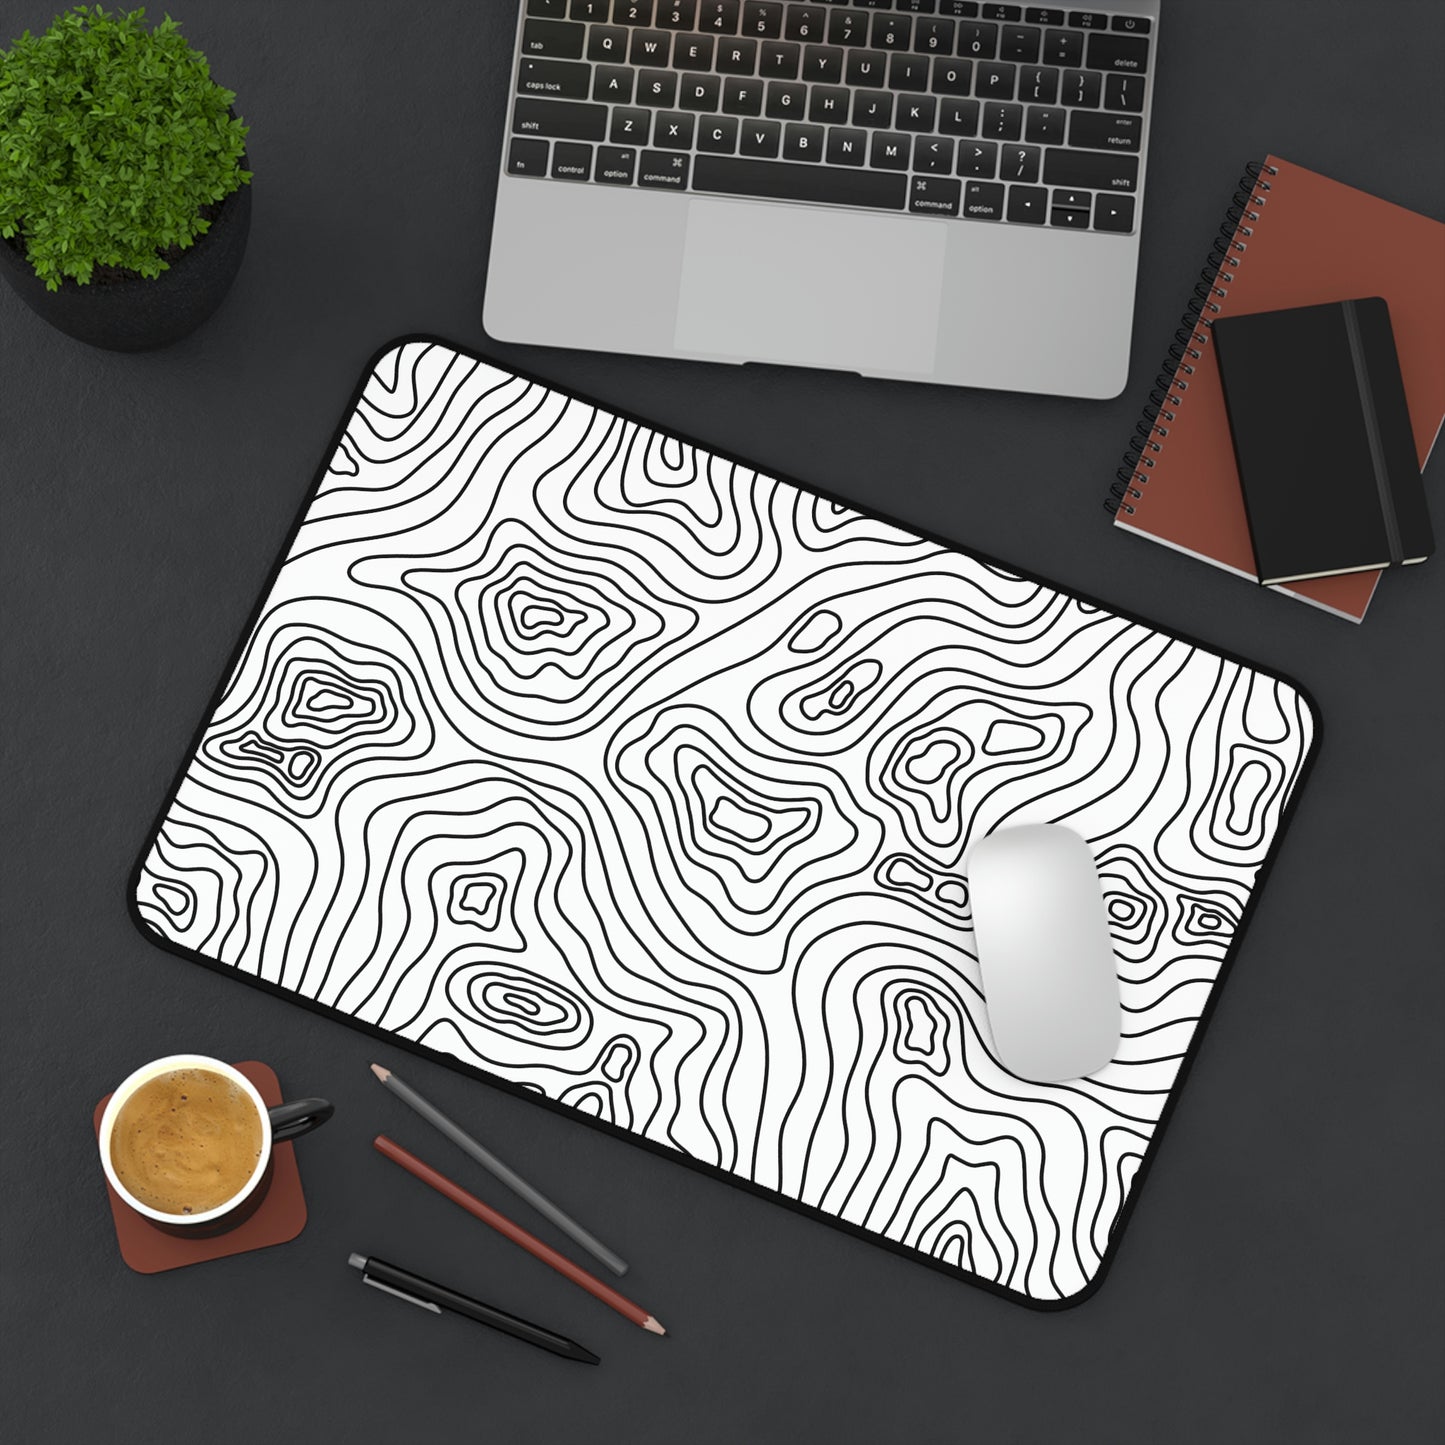 A 12" x 18" white desk mat with black topographic lines sitting at an angle. A mouse sits on top of it.